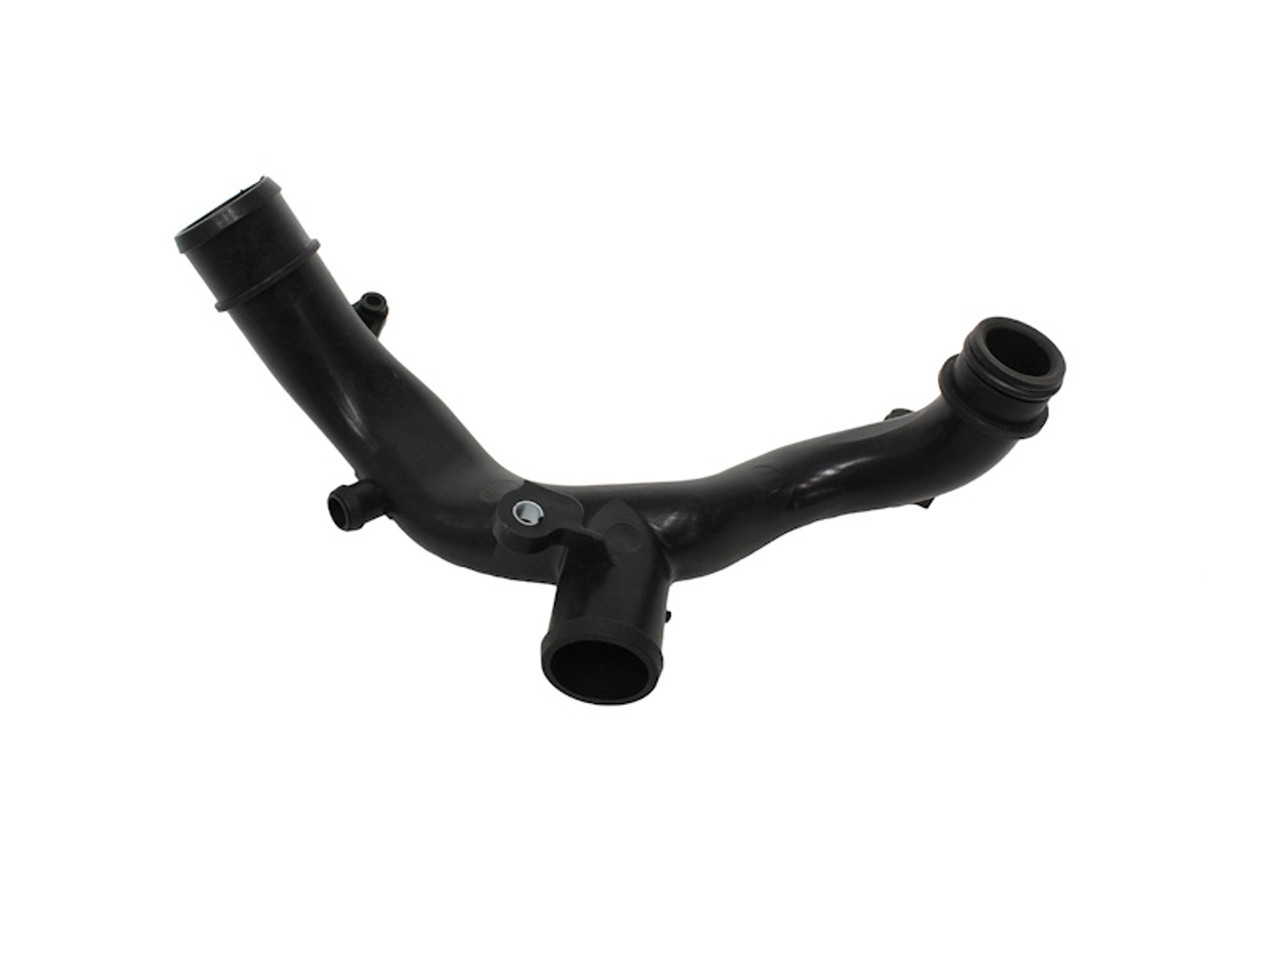 Allmakes 4x4 5.0 and 3.0 Supercharged Water Outlet to Top Hose - AJ813917